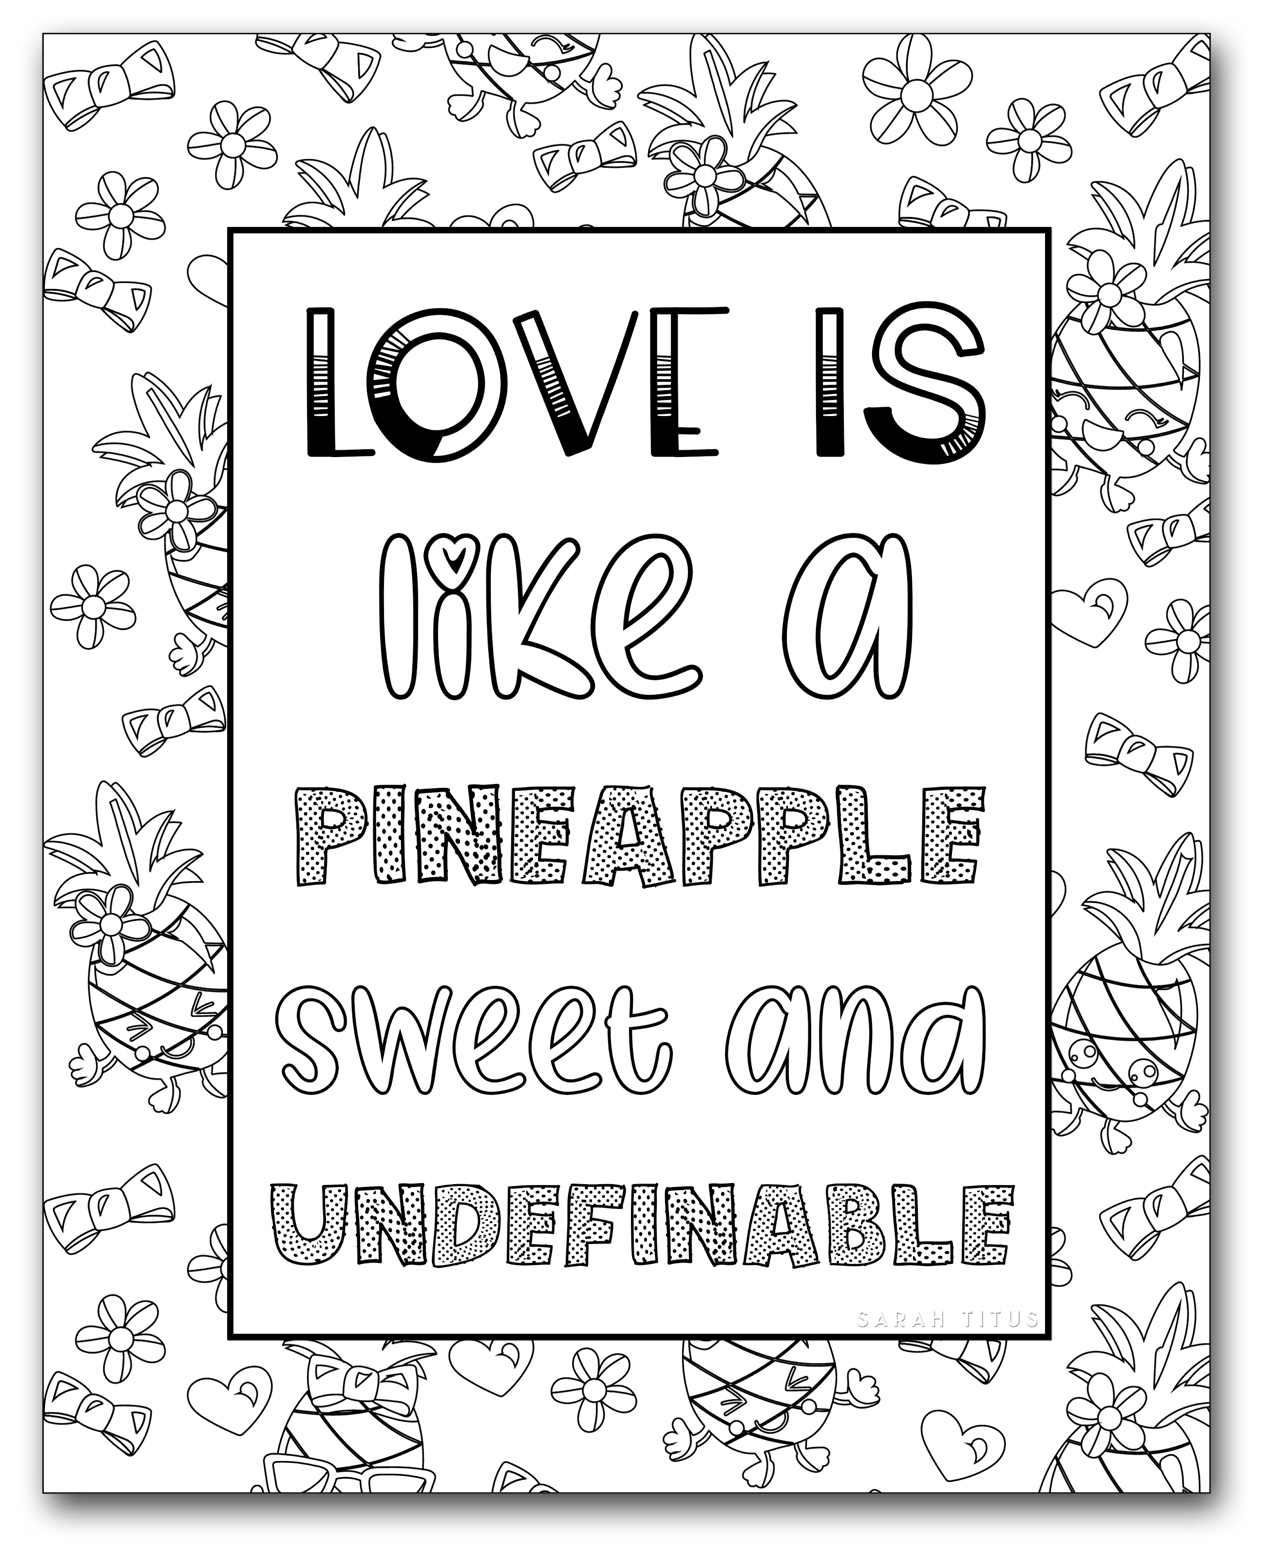 Printable Coloring Pages for Girls - Sarah Titus